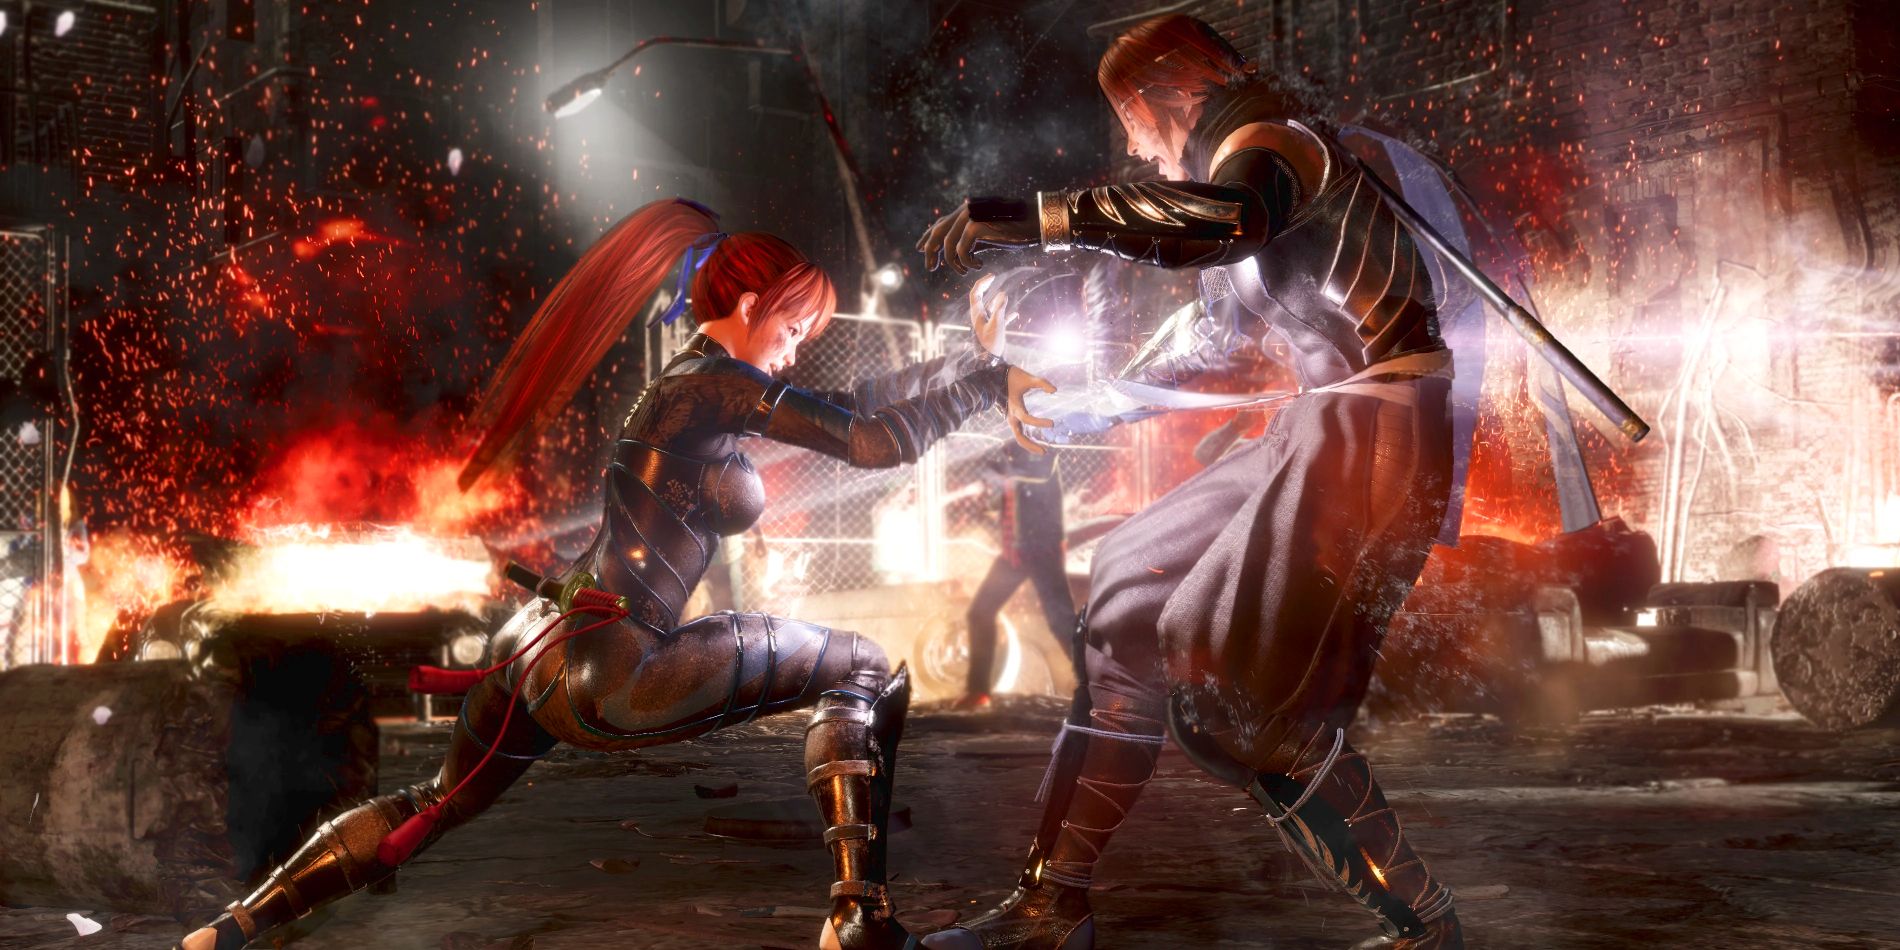 Kasumi from Dead or Alive is seen fighting an opponent in a street filled with fire and broken cement.